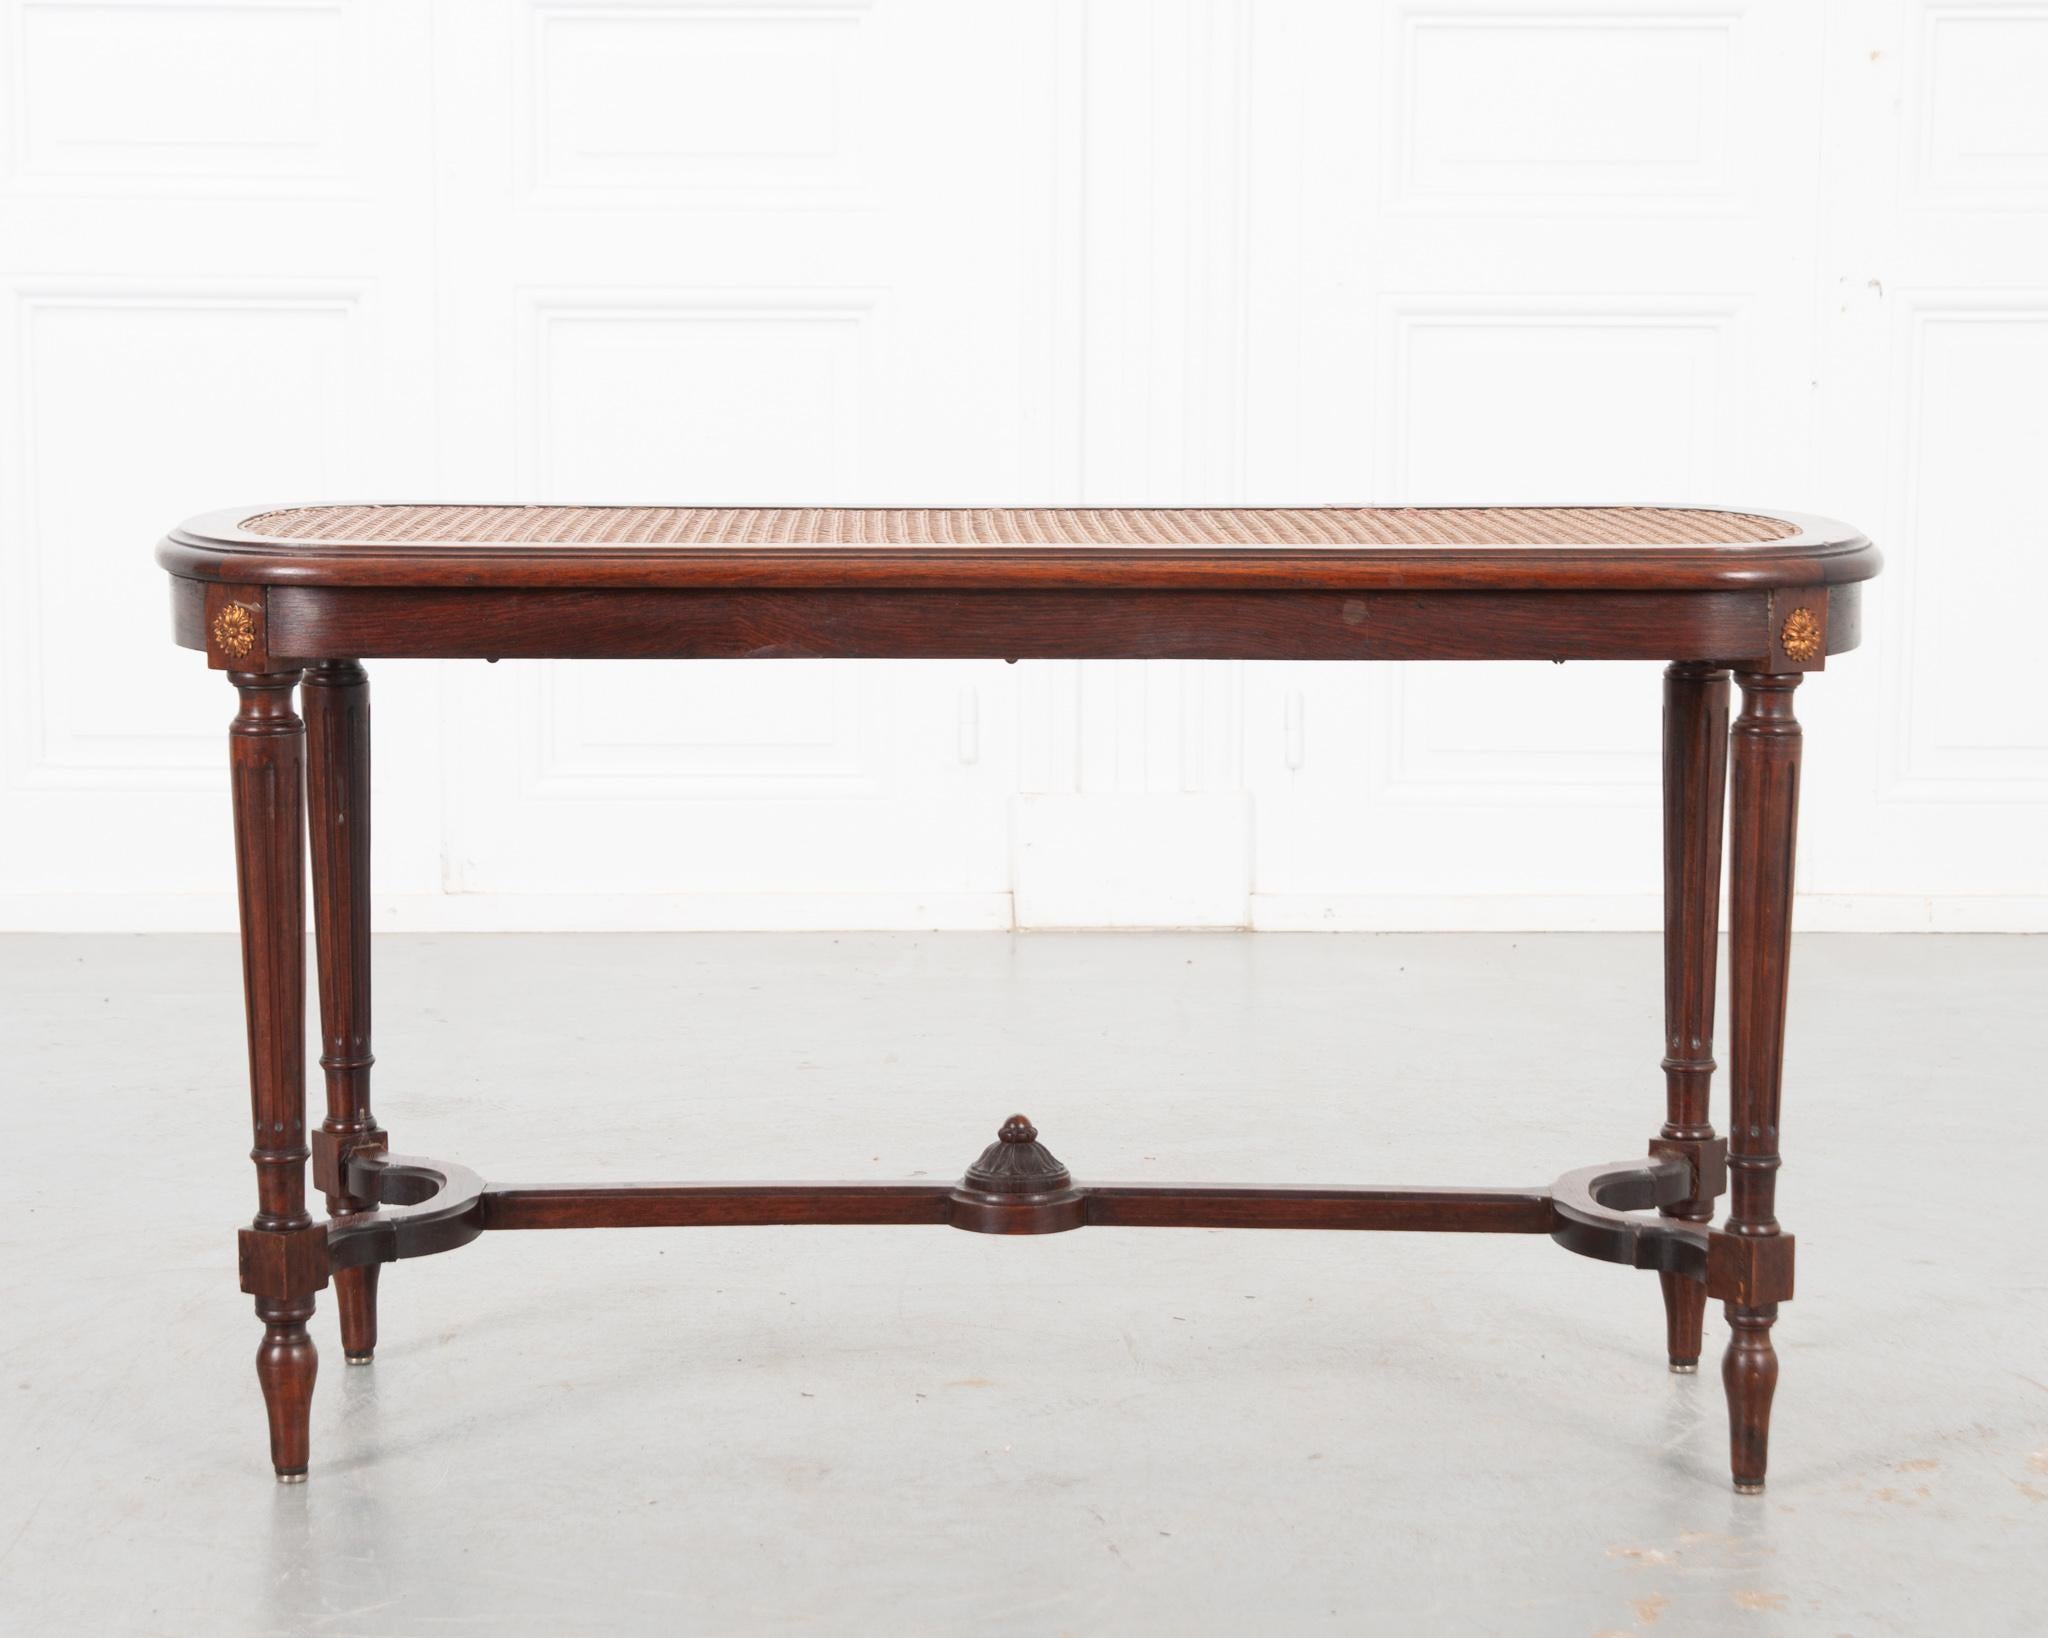 Carved French 19th Century Louis XVI Style Cane Bench